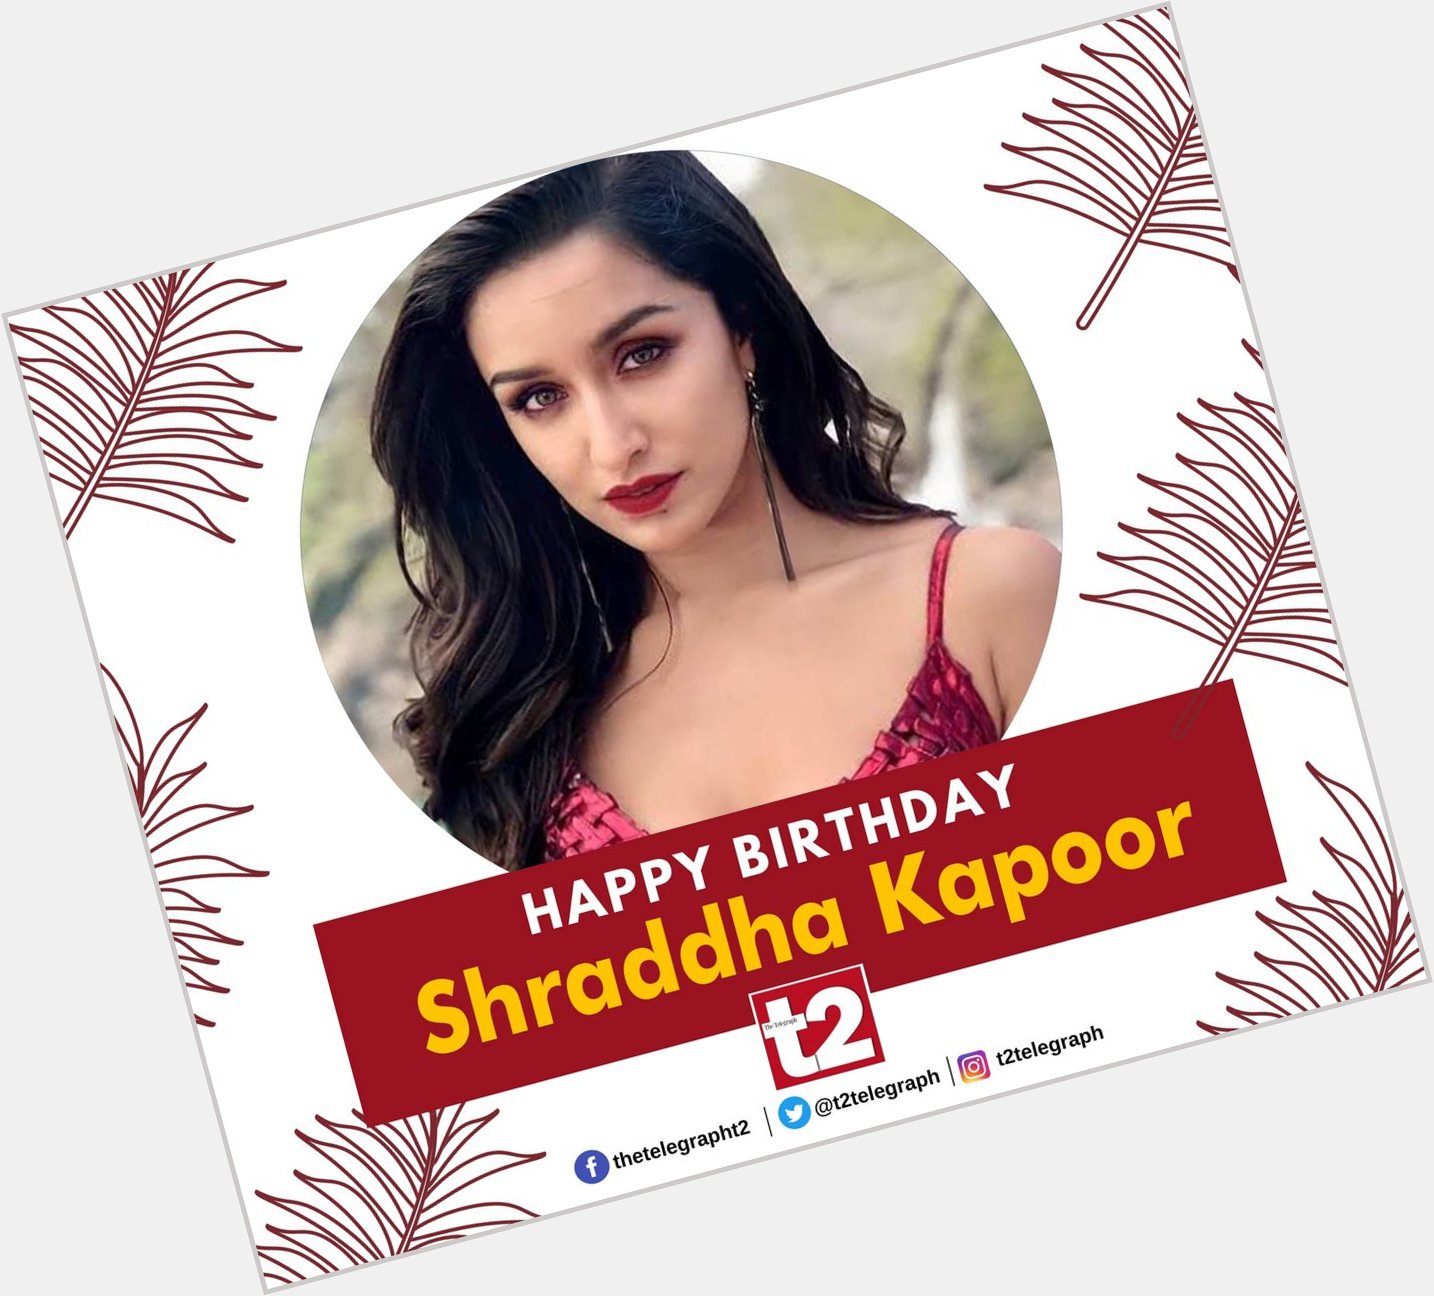 T2 wishes the forever sunshine-y Shraddha Kapoor a very happy birthday 